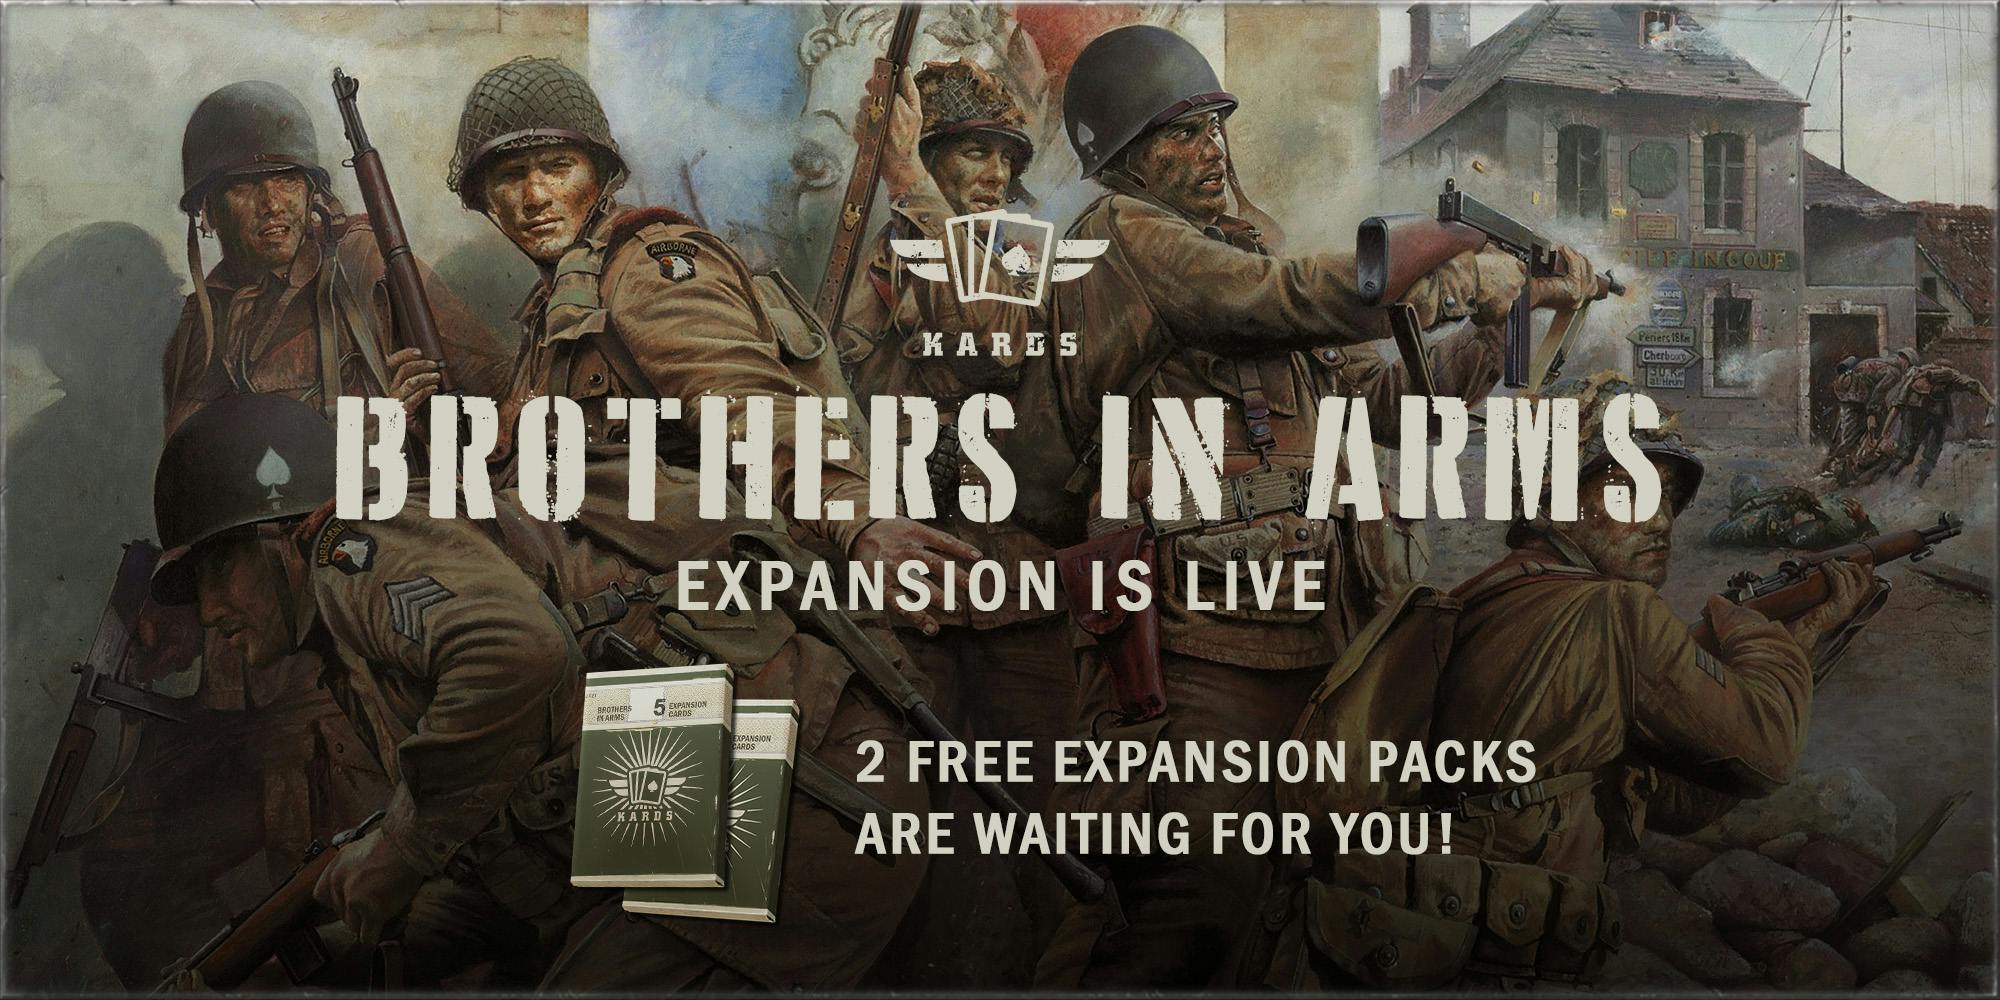 Brothers in Arms Expansion Has Landed: A New Era in KARDS Begins